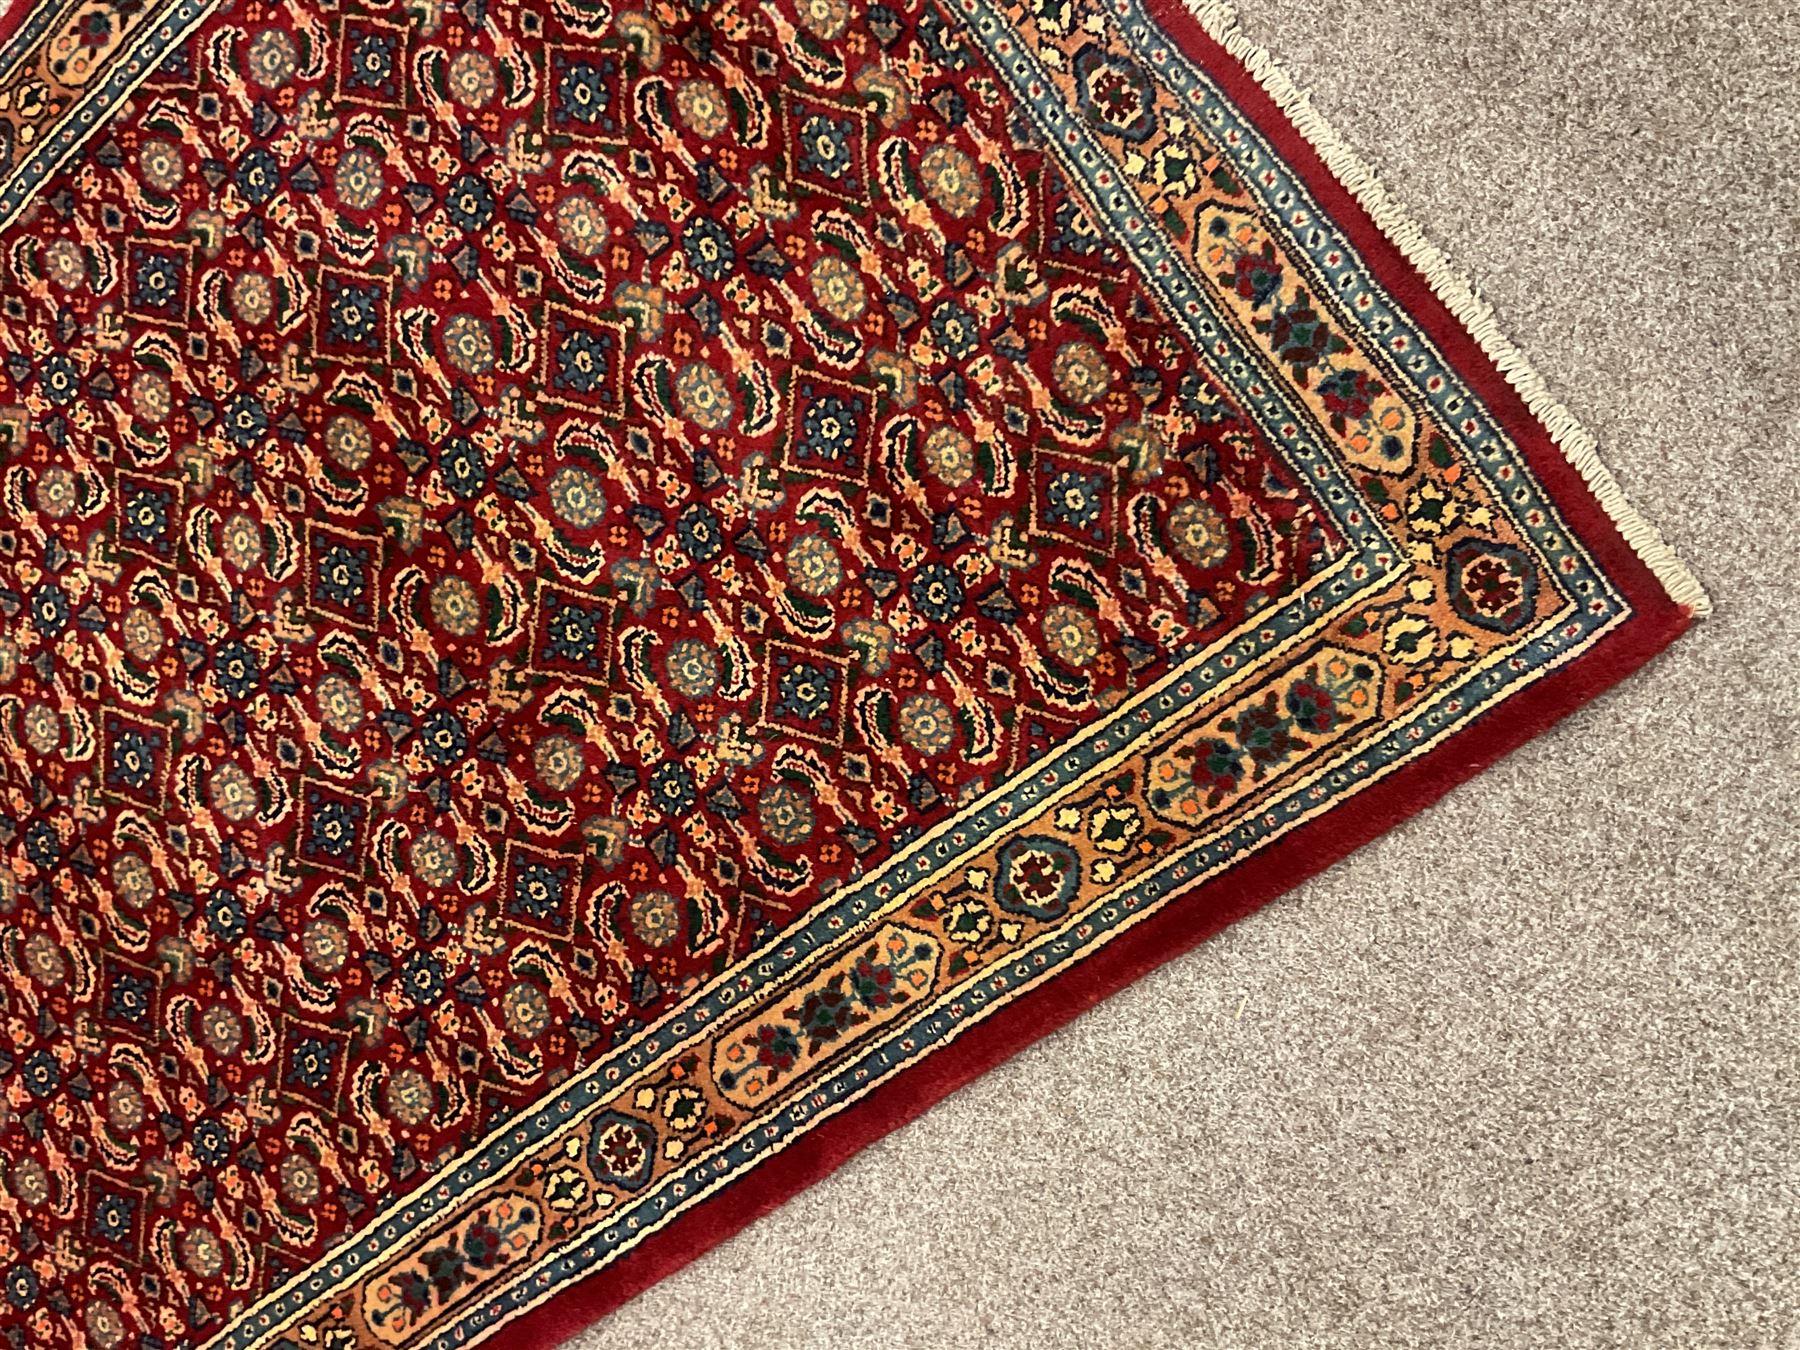 Persian red ground rug - Image 3 of 5